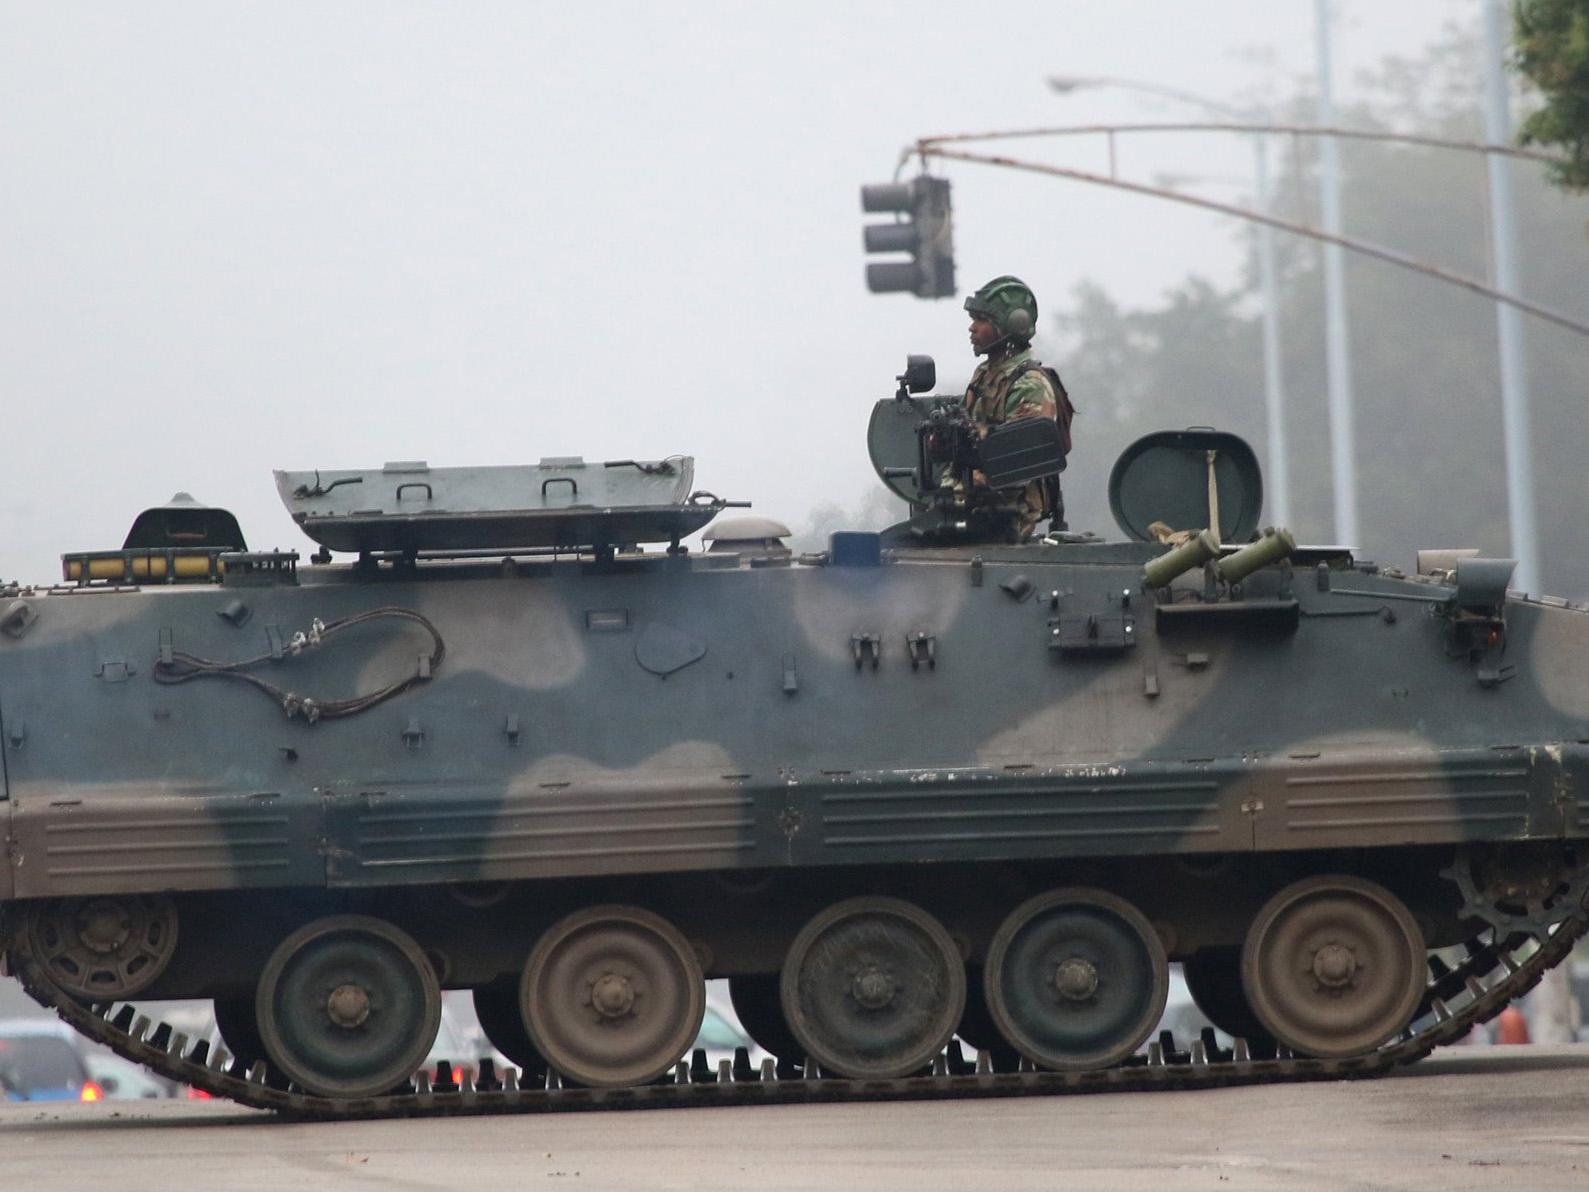 An army tanker blocks the main road to Parliament building in Harare after the Zimbabwe National Army (ZNA) has reportedly taken control over the government of President Robert Mugabe